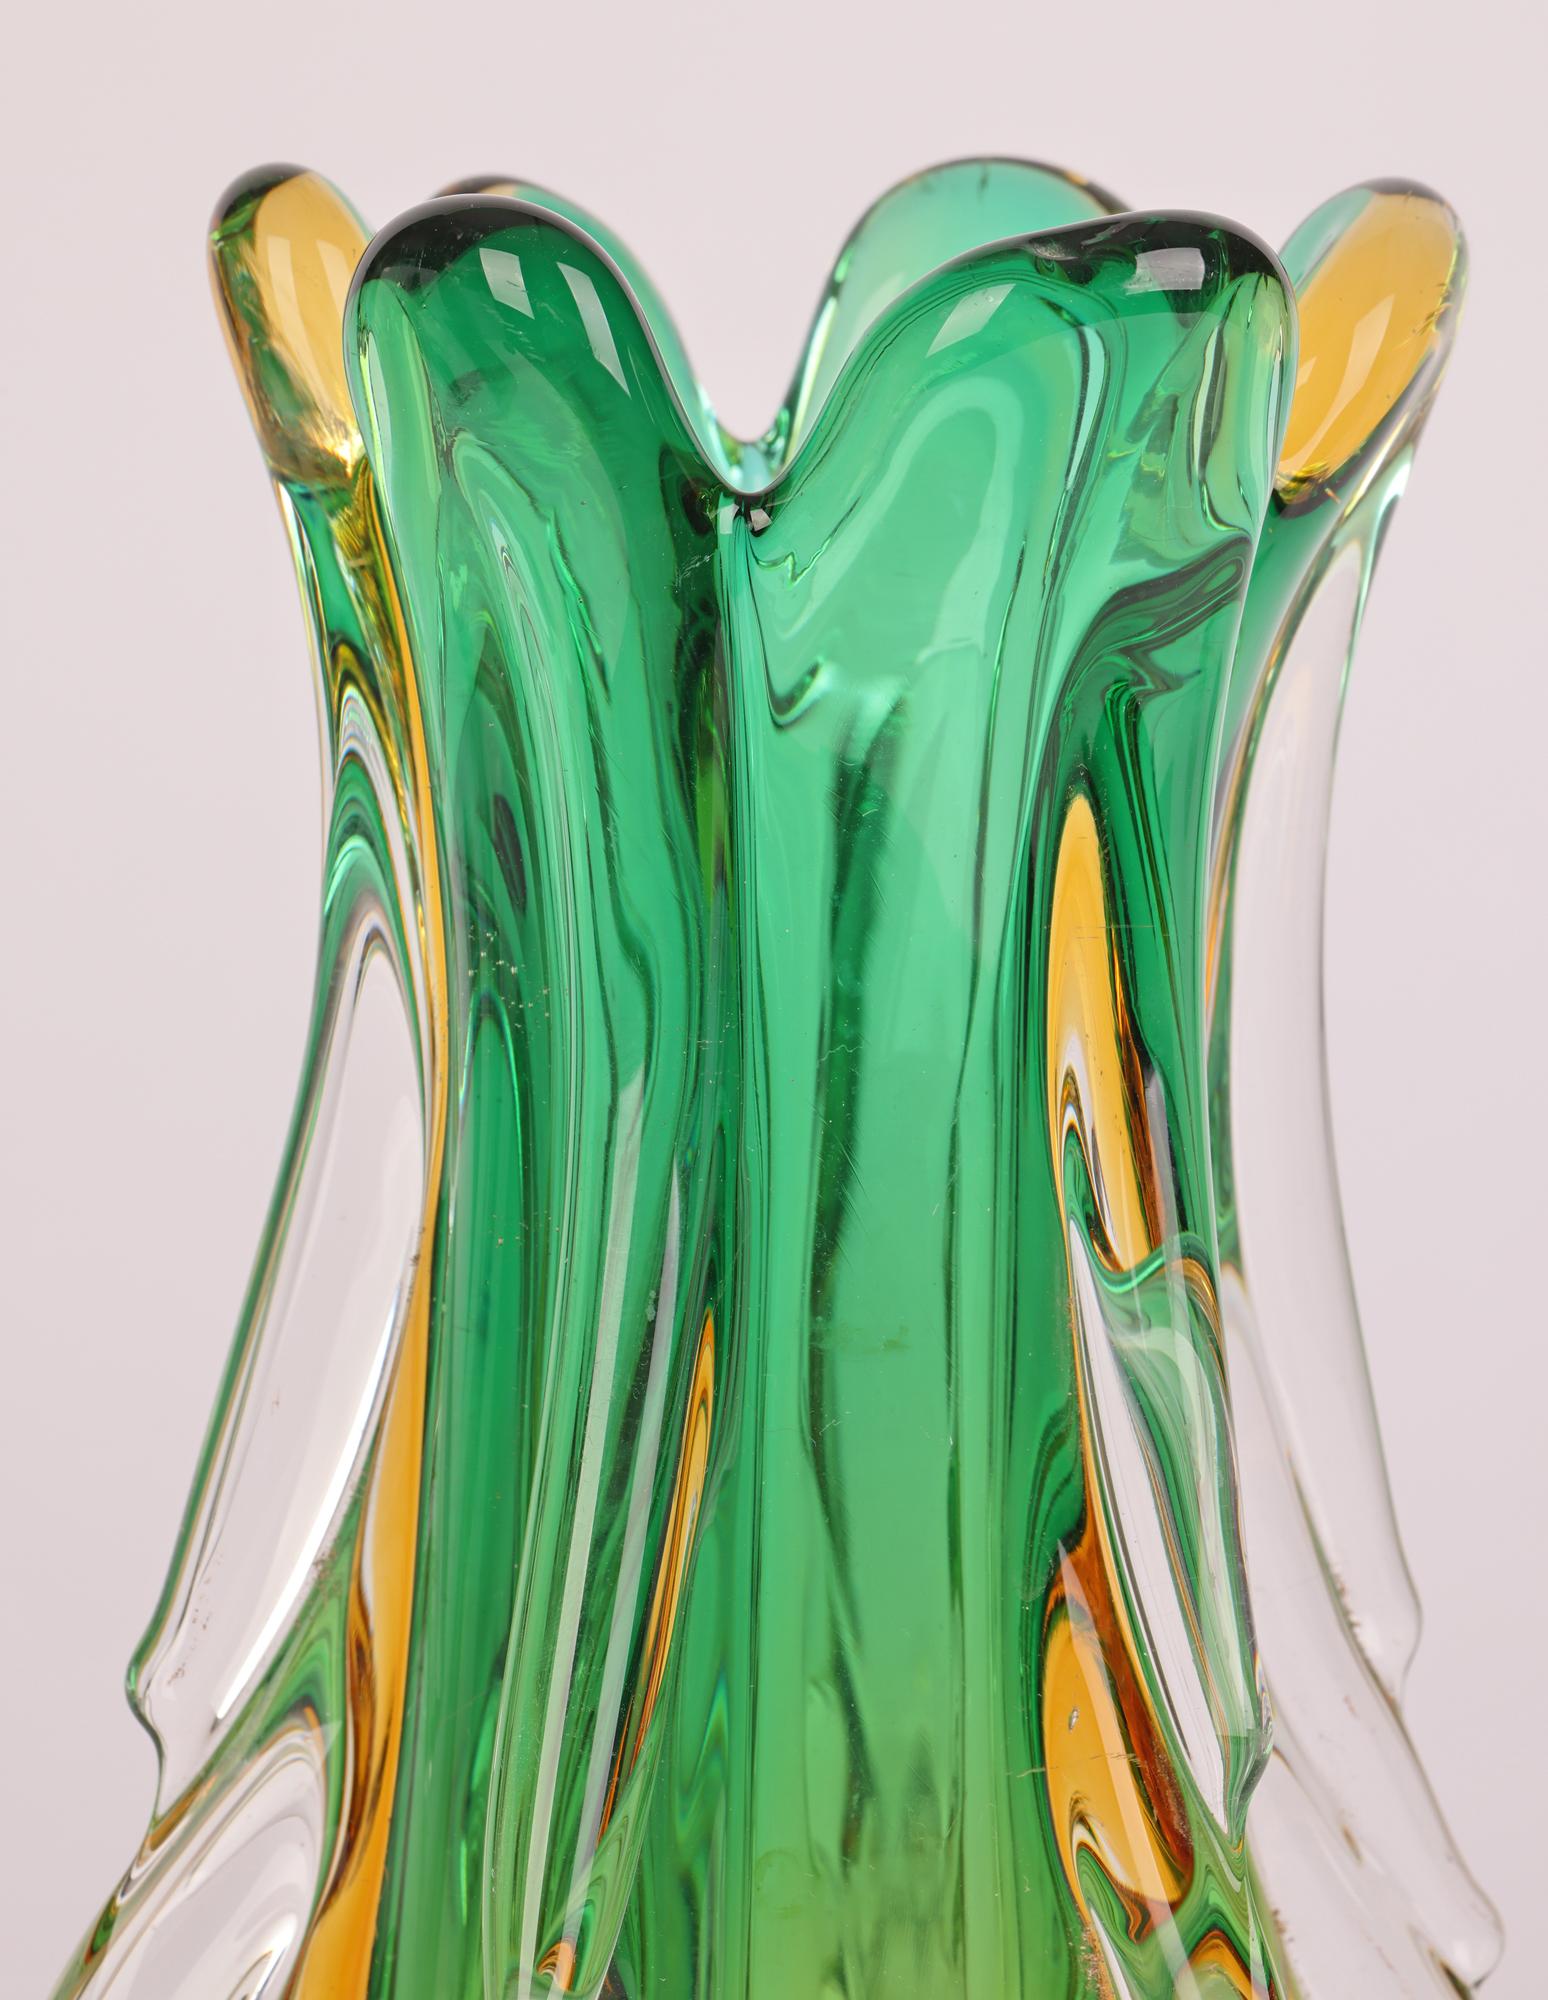 A stunning and rare mid-century Italian Murano sommerso art glass vase attributed to renowned Italian artist Flavio Poli (Italian, 1900-1984) and made for Seguso Vetri D’Arte and dating from around 1960. The vase hand blown in clear glass is heavily